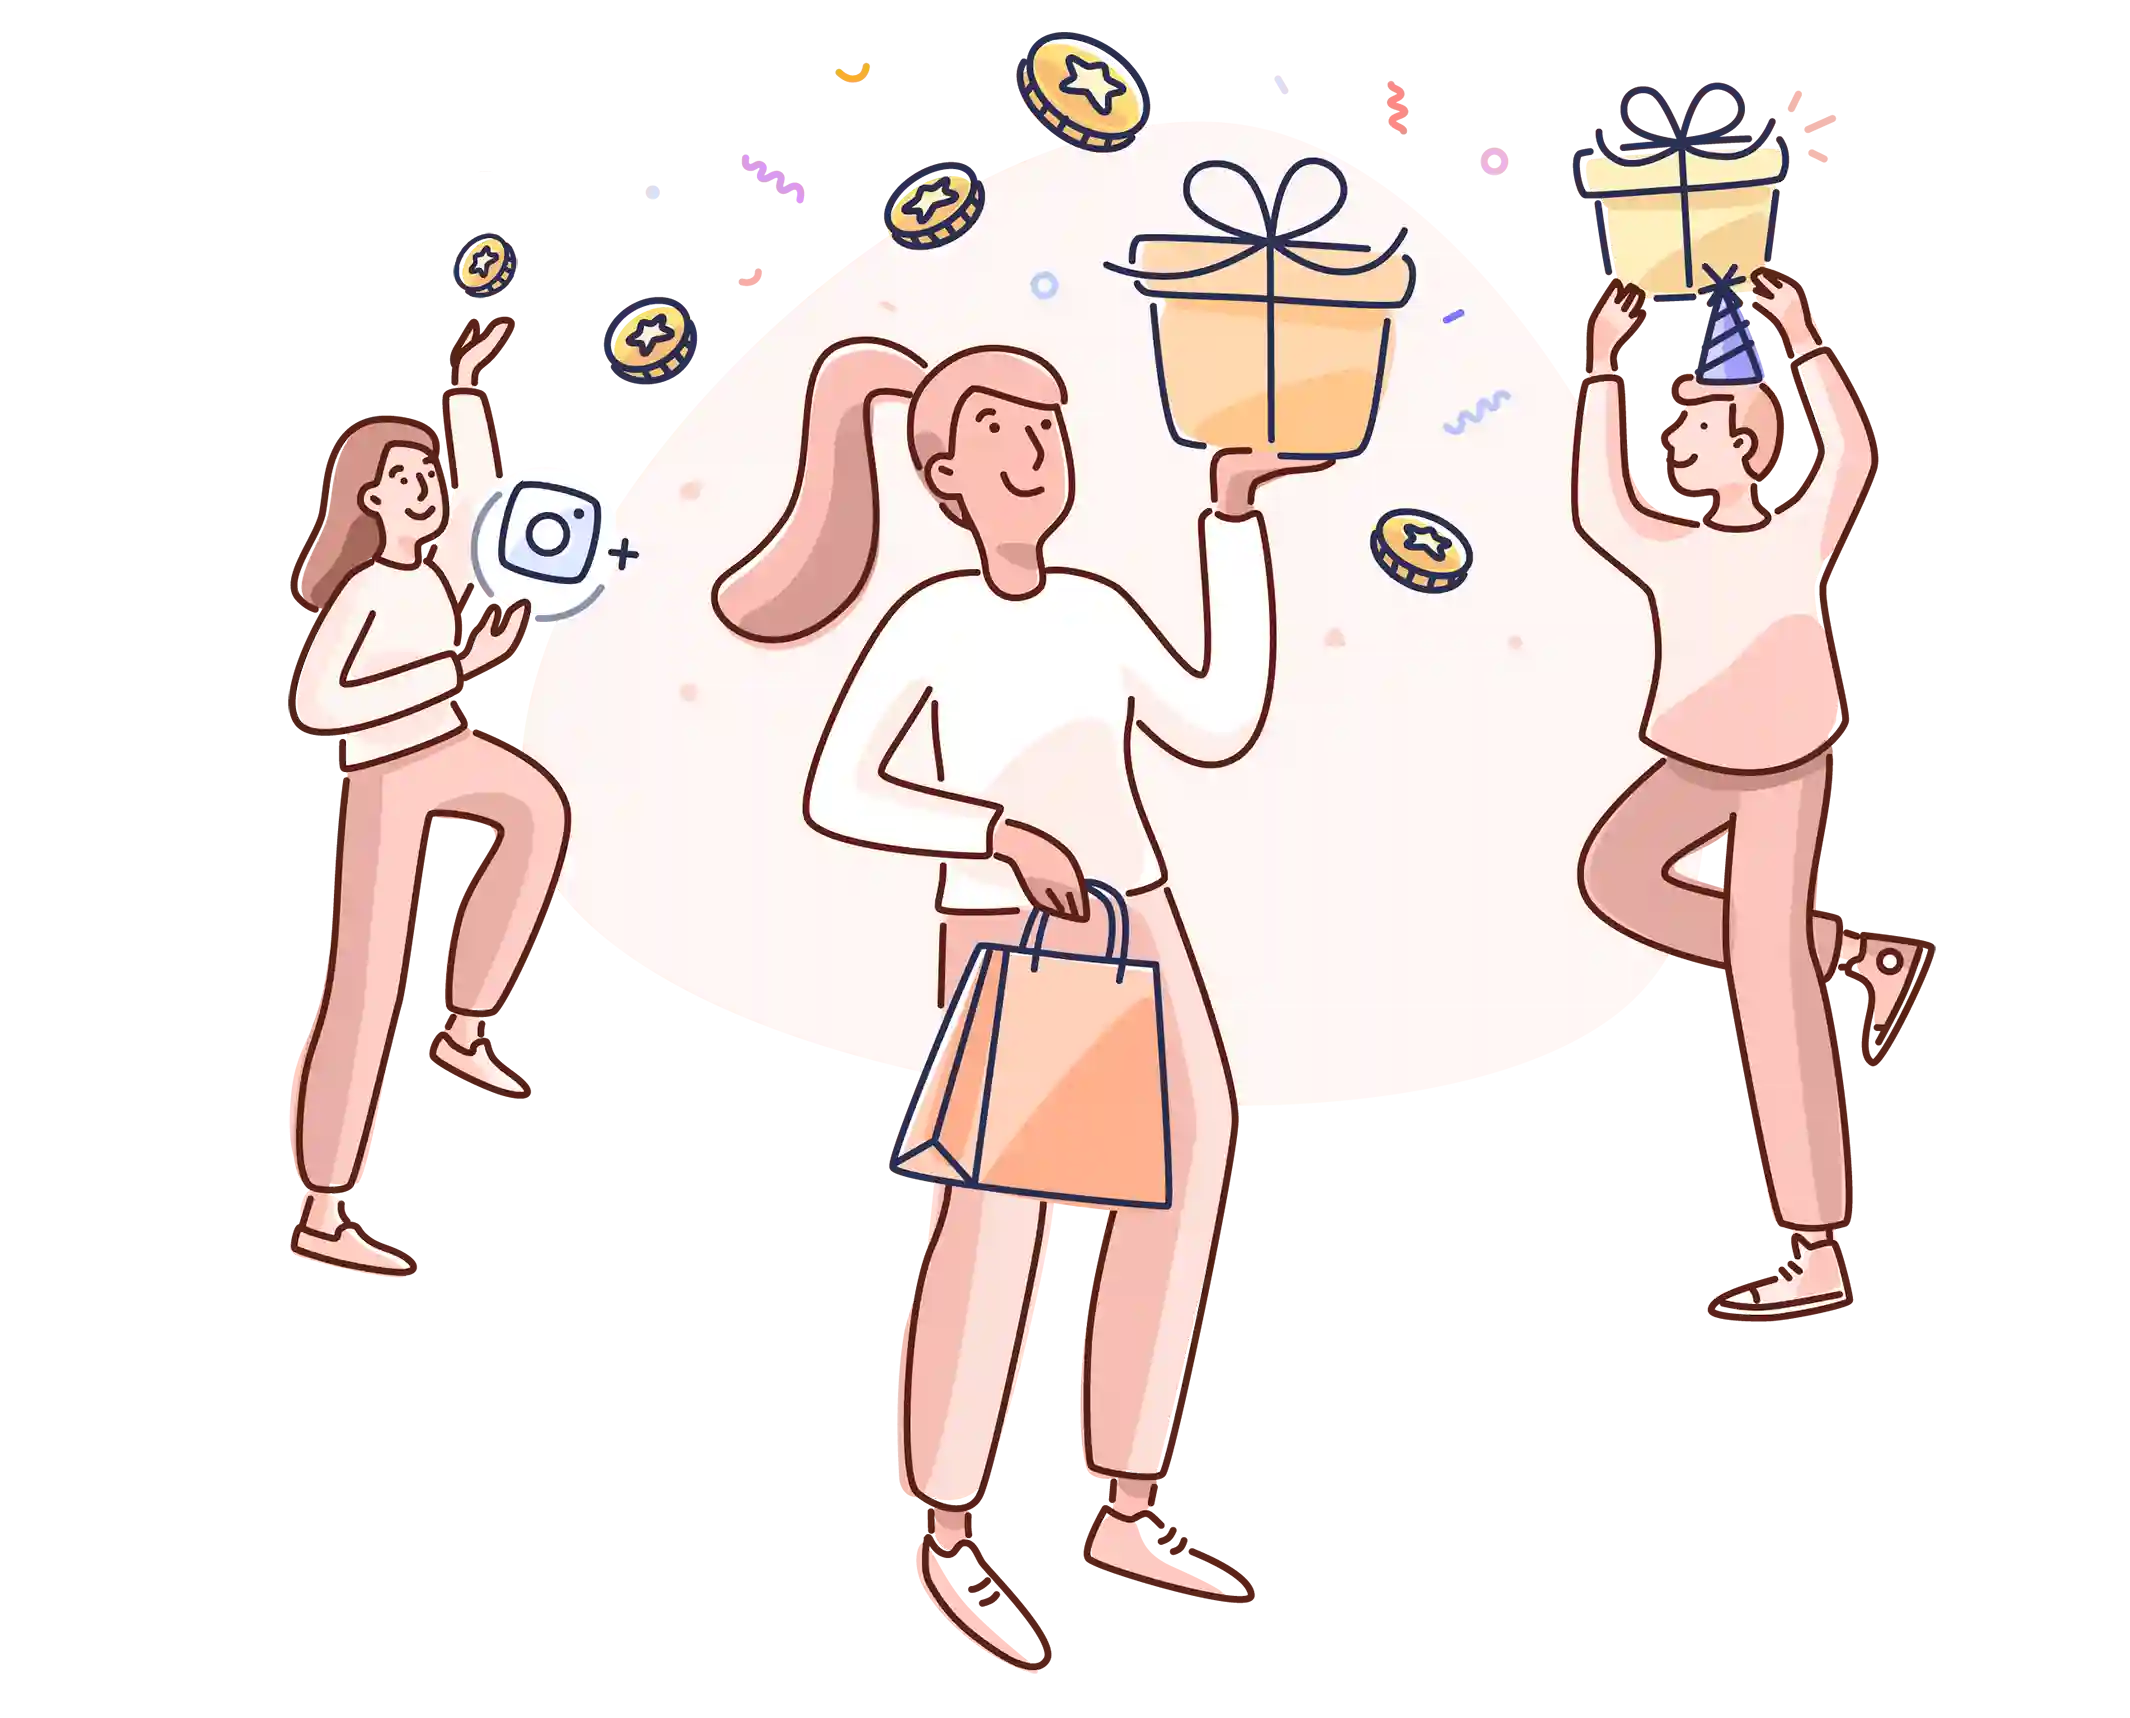 An illustration of 3 people with coins falling on them. The left has an instagram icon, the middle has a present and shopping bag, the right has a present and party hat